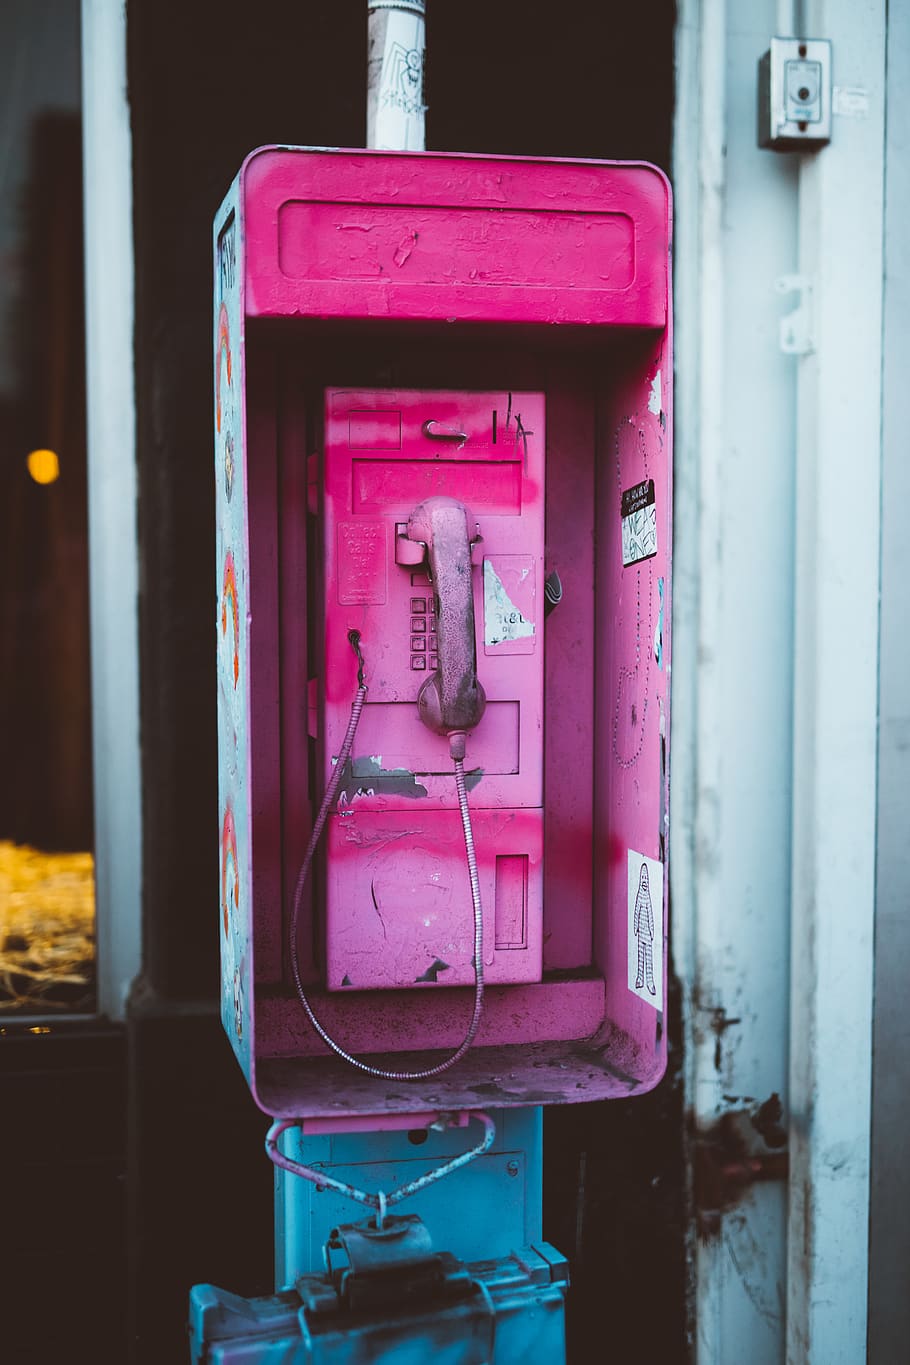 empty phone booth, letterbox, mailbox, electronics, dial telephone